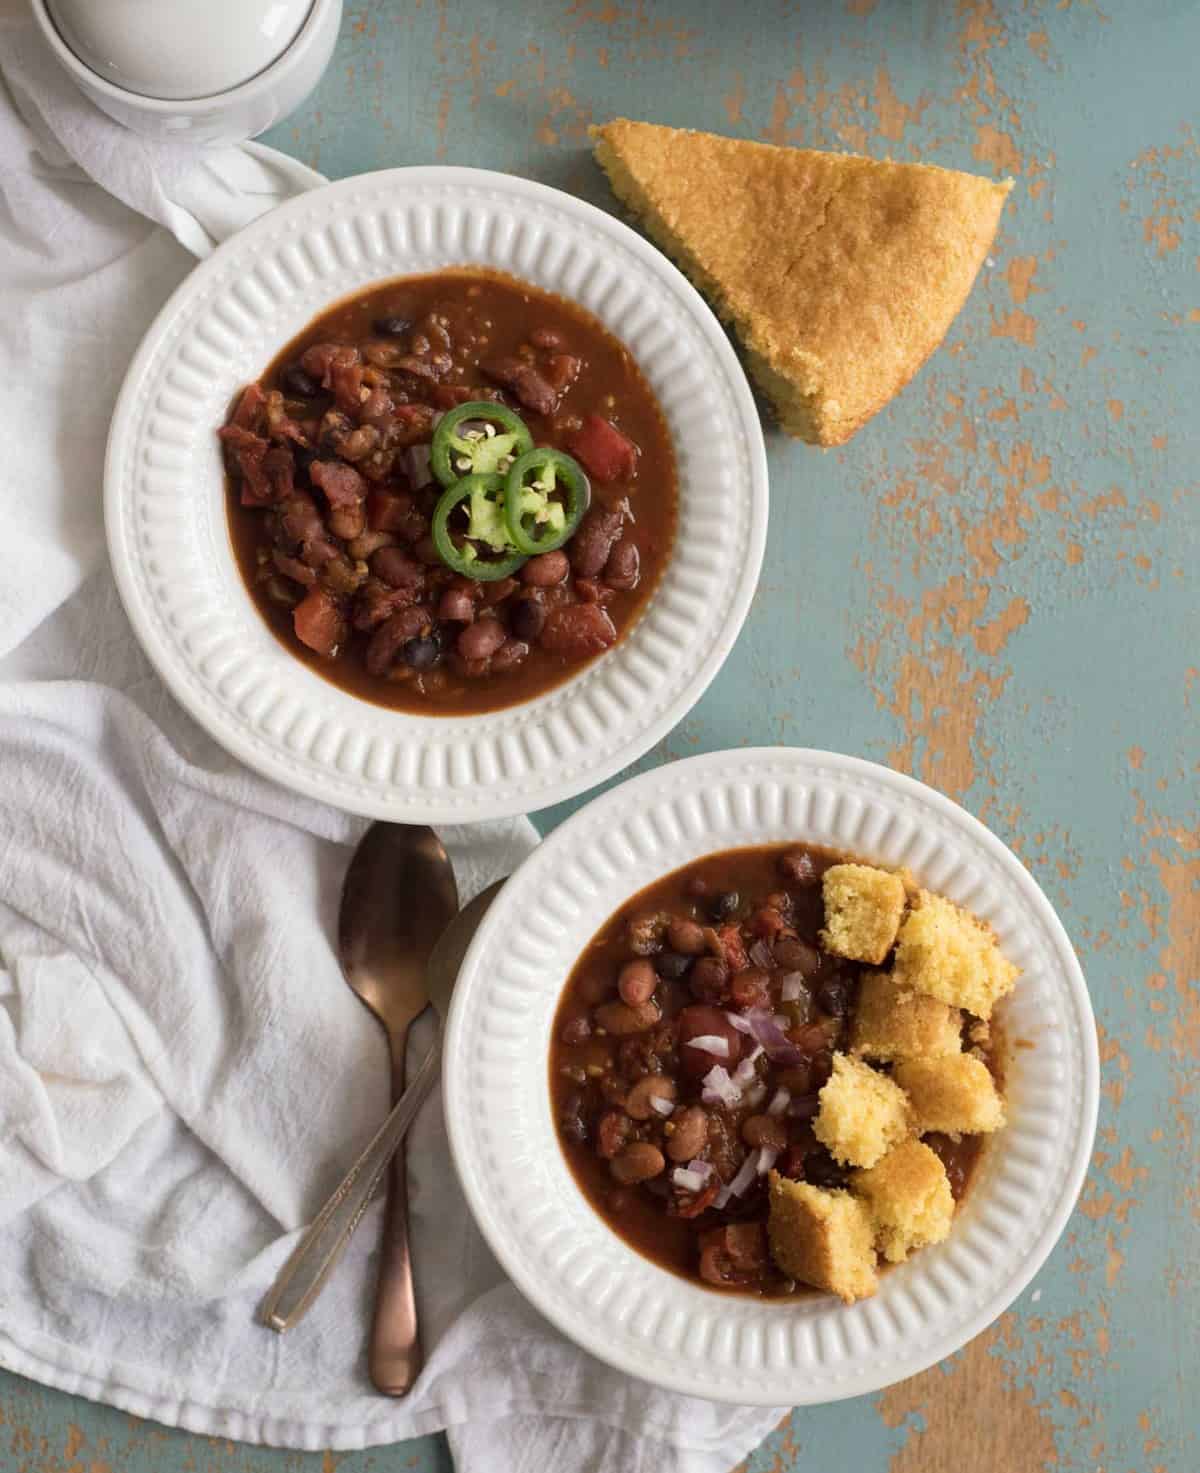 Healthy and flavorful Instant Pot Vegetarian Chili recipe made with a mix of dried beans, vegetables, spices, and a secret ingredient. A healthy one pot meatless meal your whole family will love.